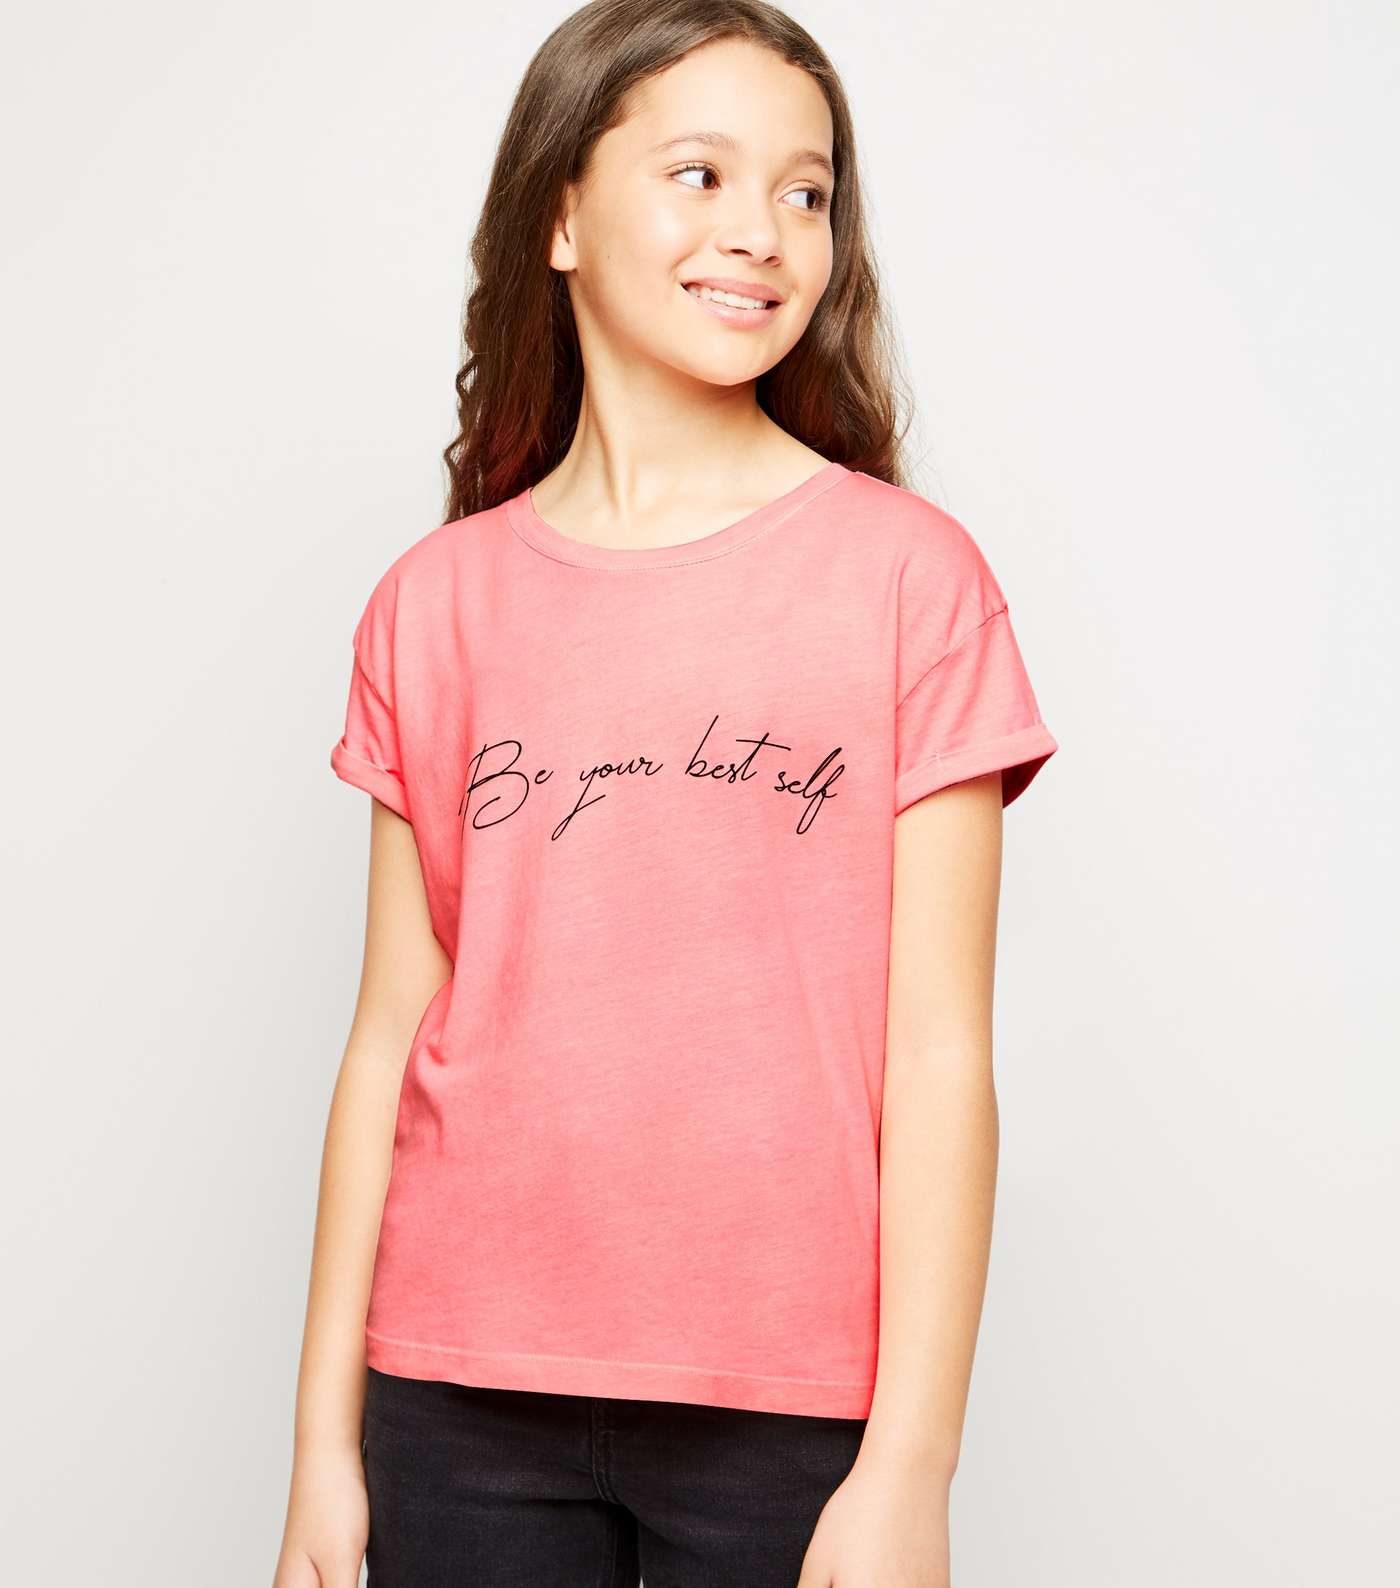 Girls Bright Pink Be Your Best Self Slogan T-Shirt